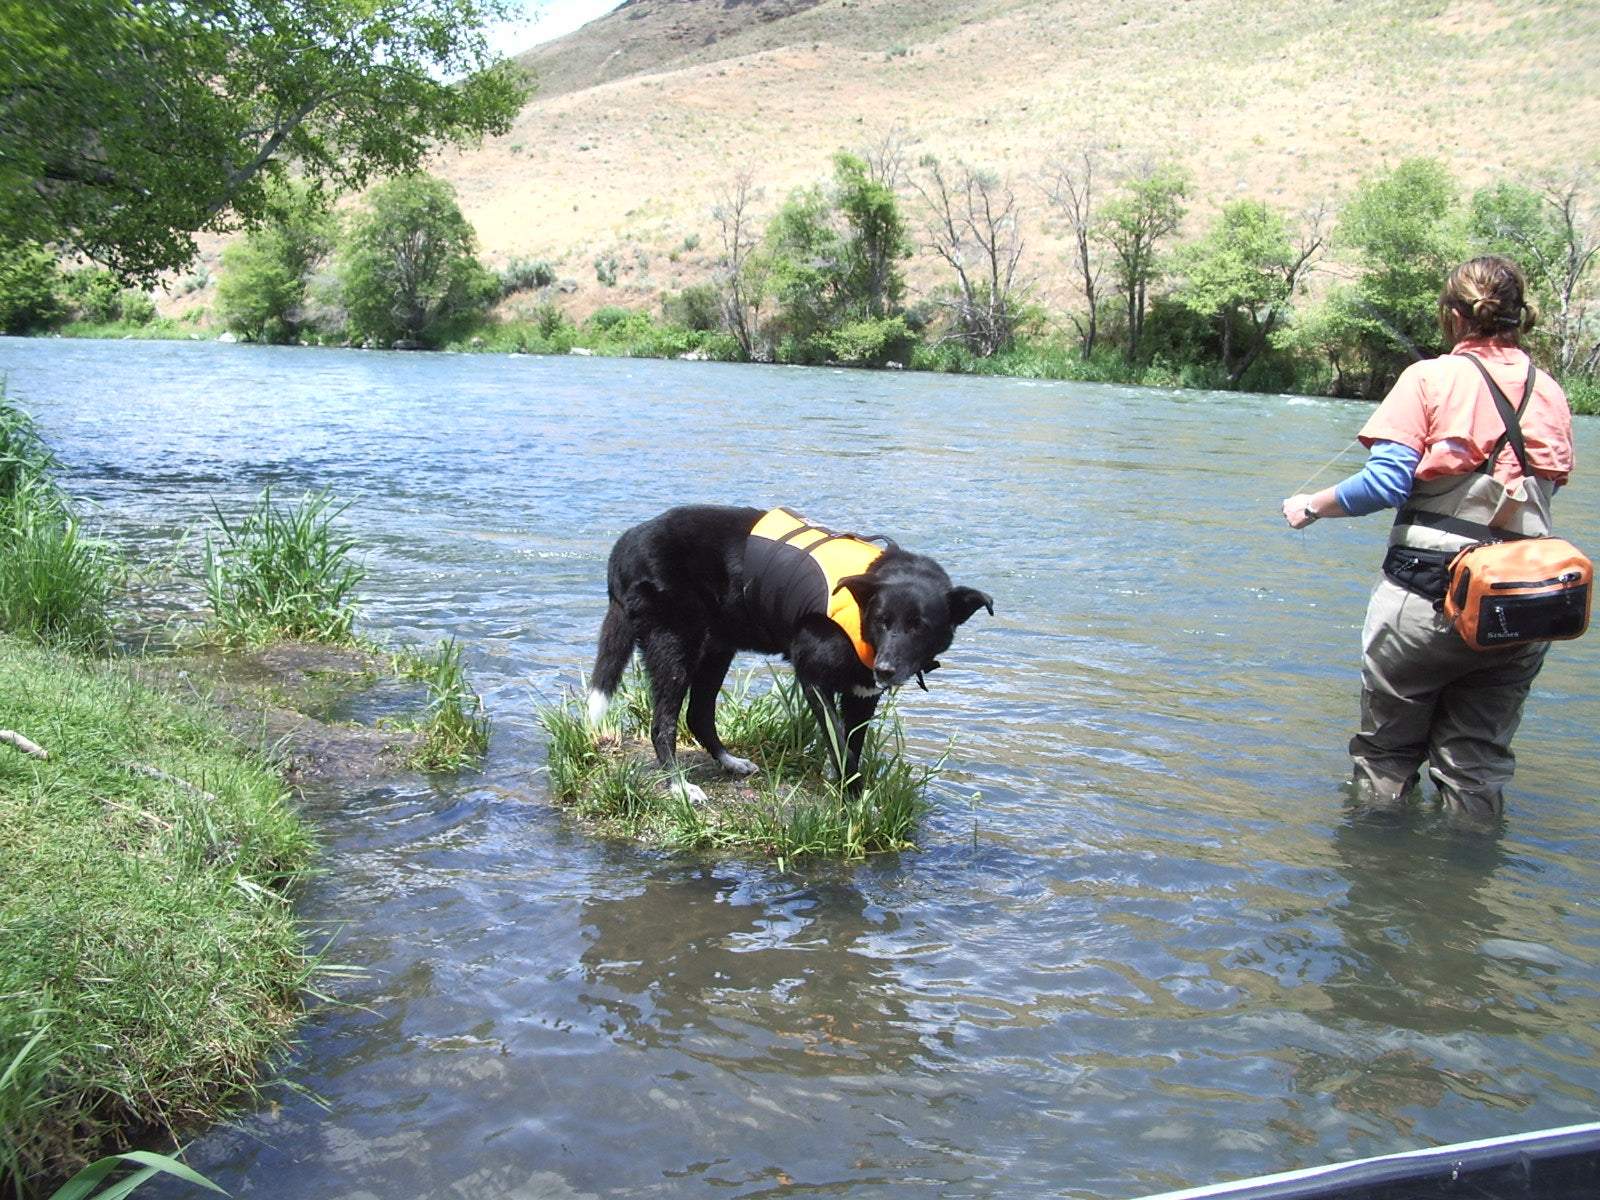 Dove and her dog Sierra fishing in a river